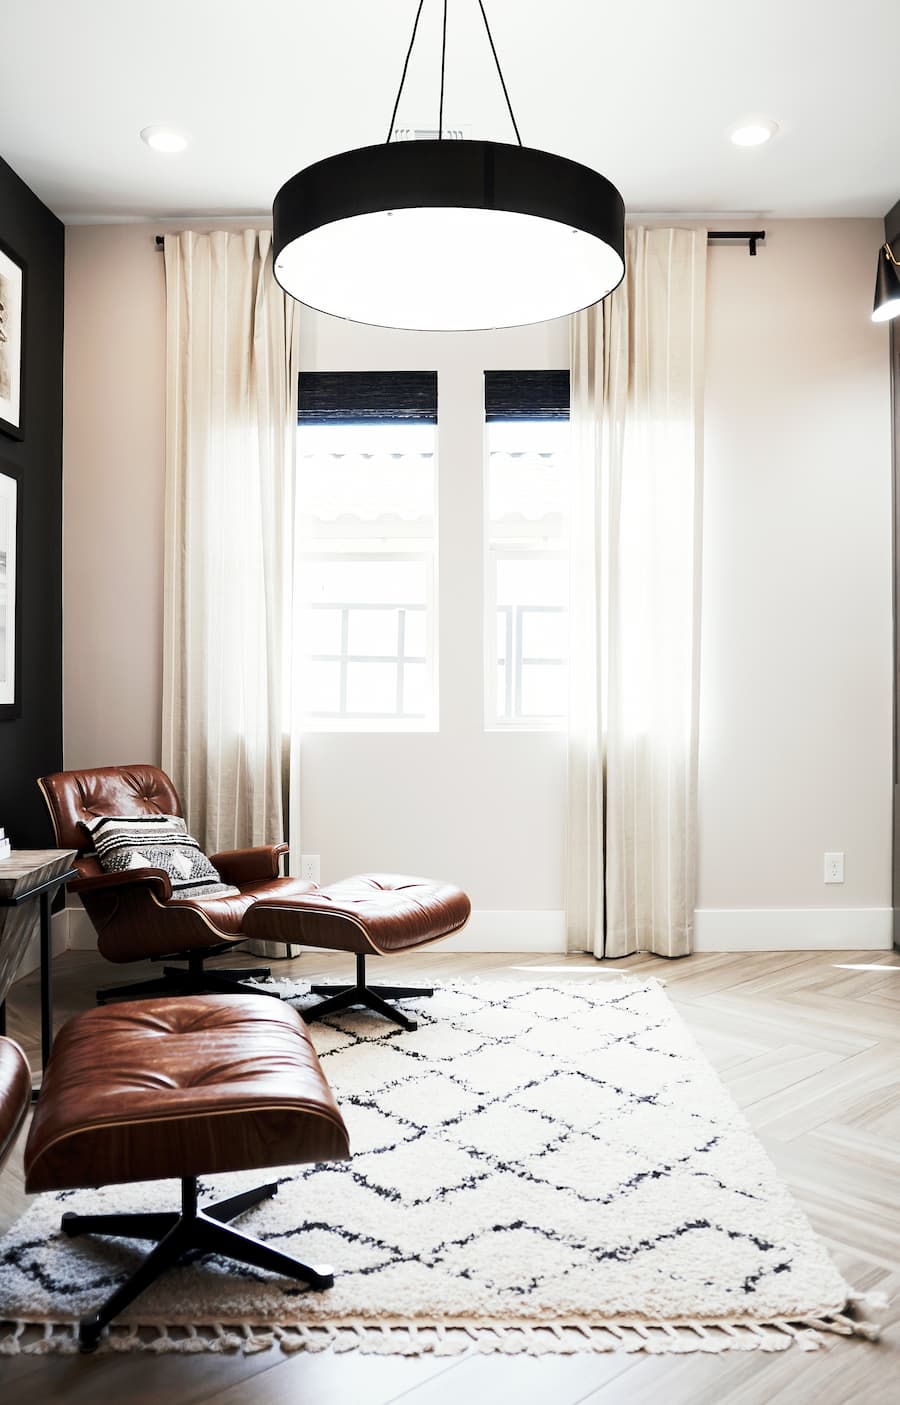 Minimalist room painted in white with large black light pendant hanging from the ceiling. Brown leather Charles Eames chair and foot stool positioned to the left of the room against a wall painted in black and a cream rug positioned on the floor in the centre with a black diamond outline pattern